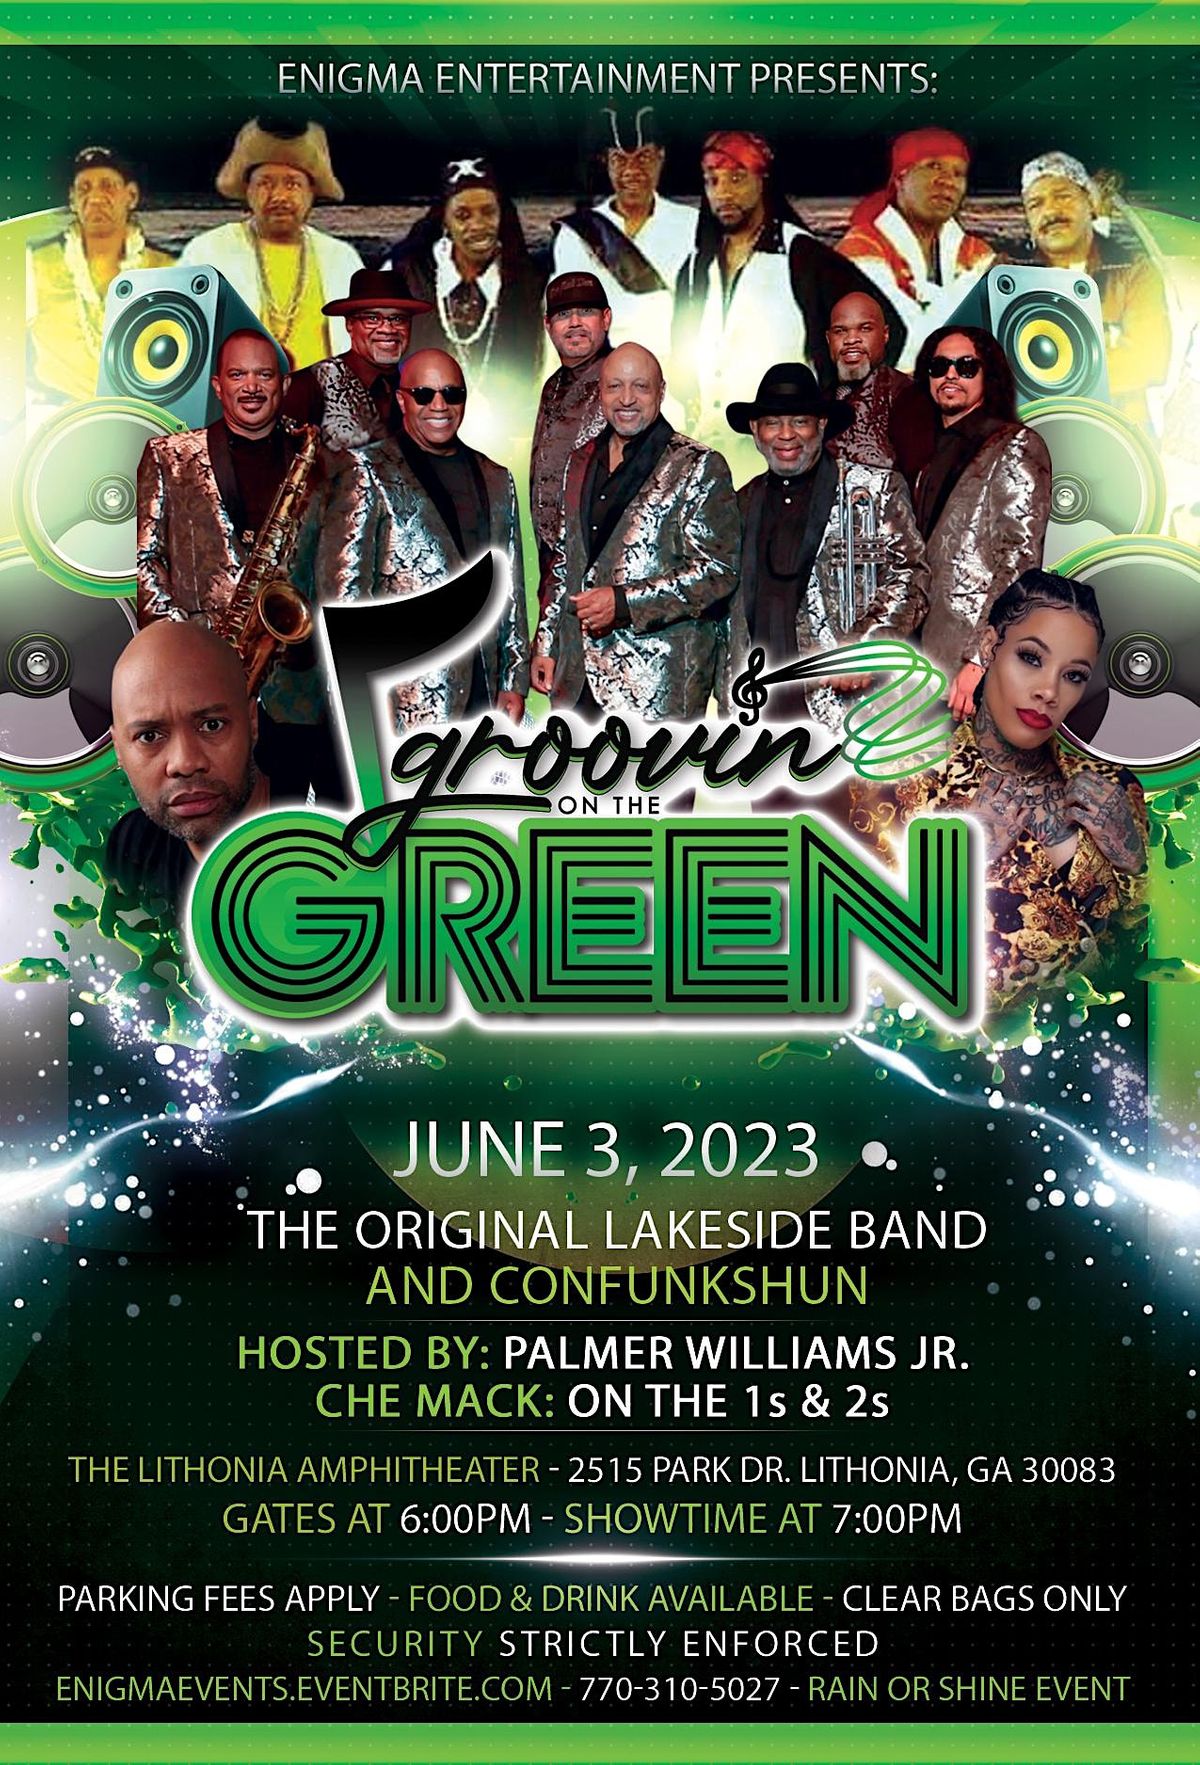 Groovin on the Green with The Original Lakeside Band & Confunkshun